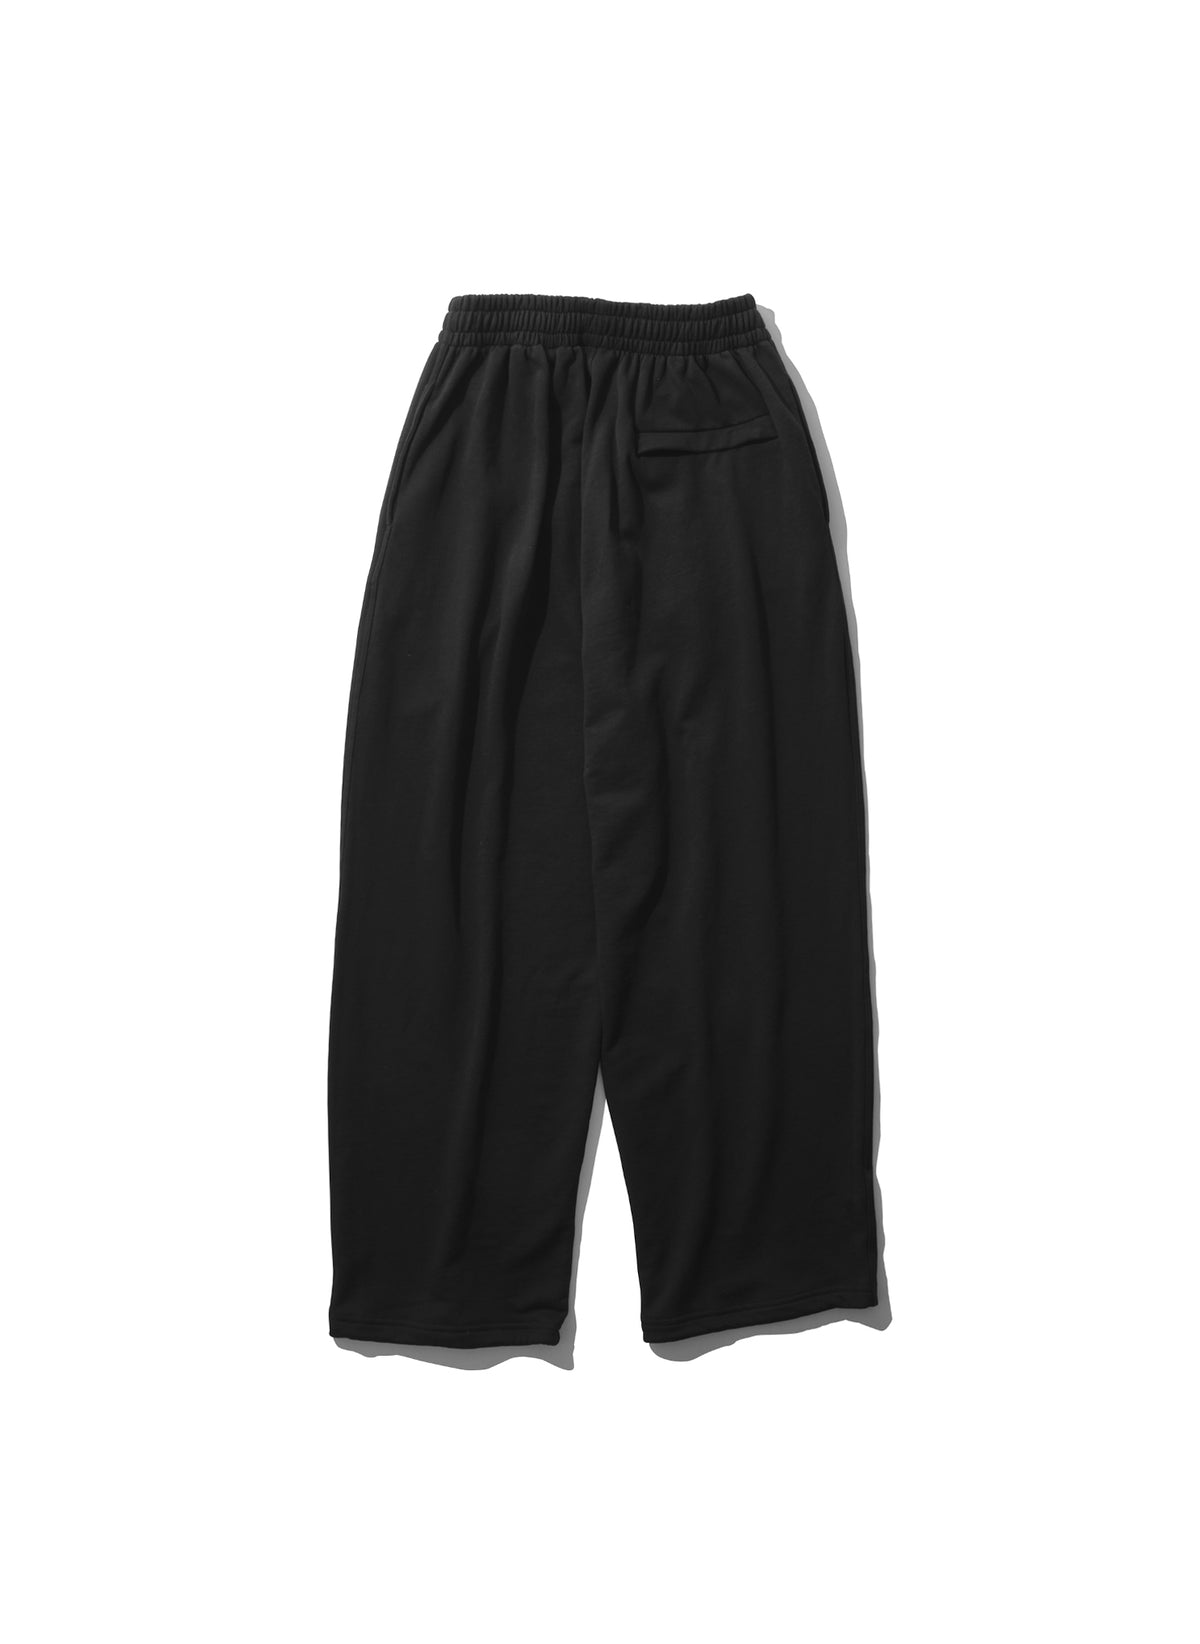 WILLY CHAVARRIA / NORTHSIDER JOGGER PANTS WILLY BLACK